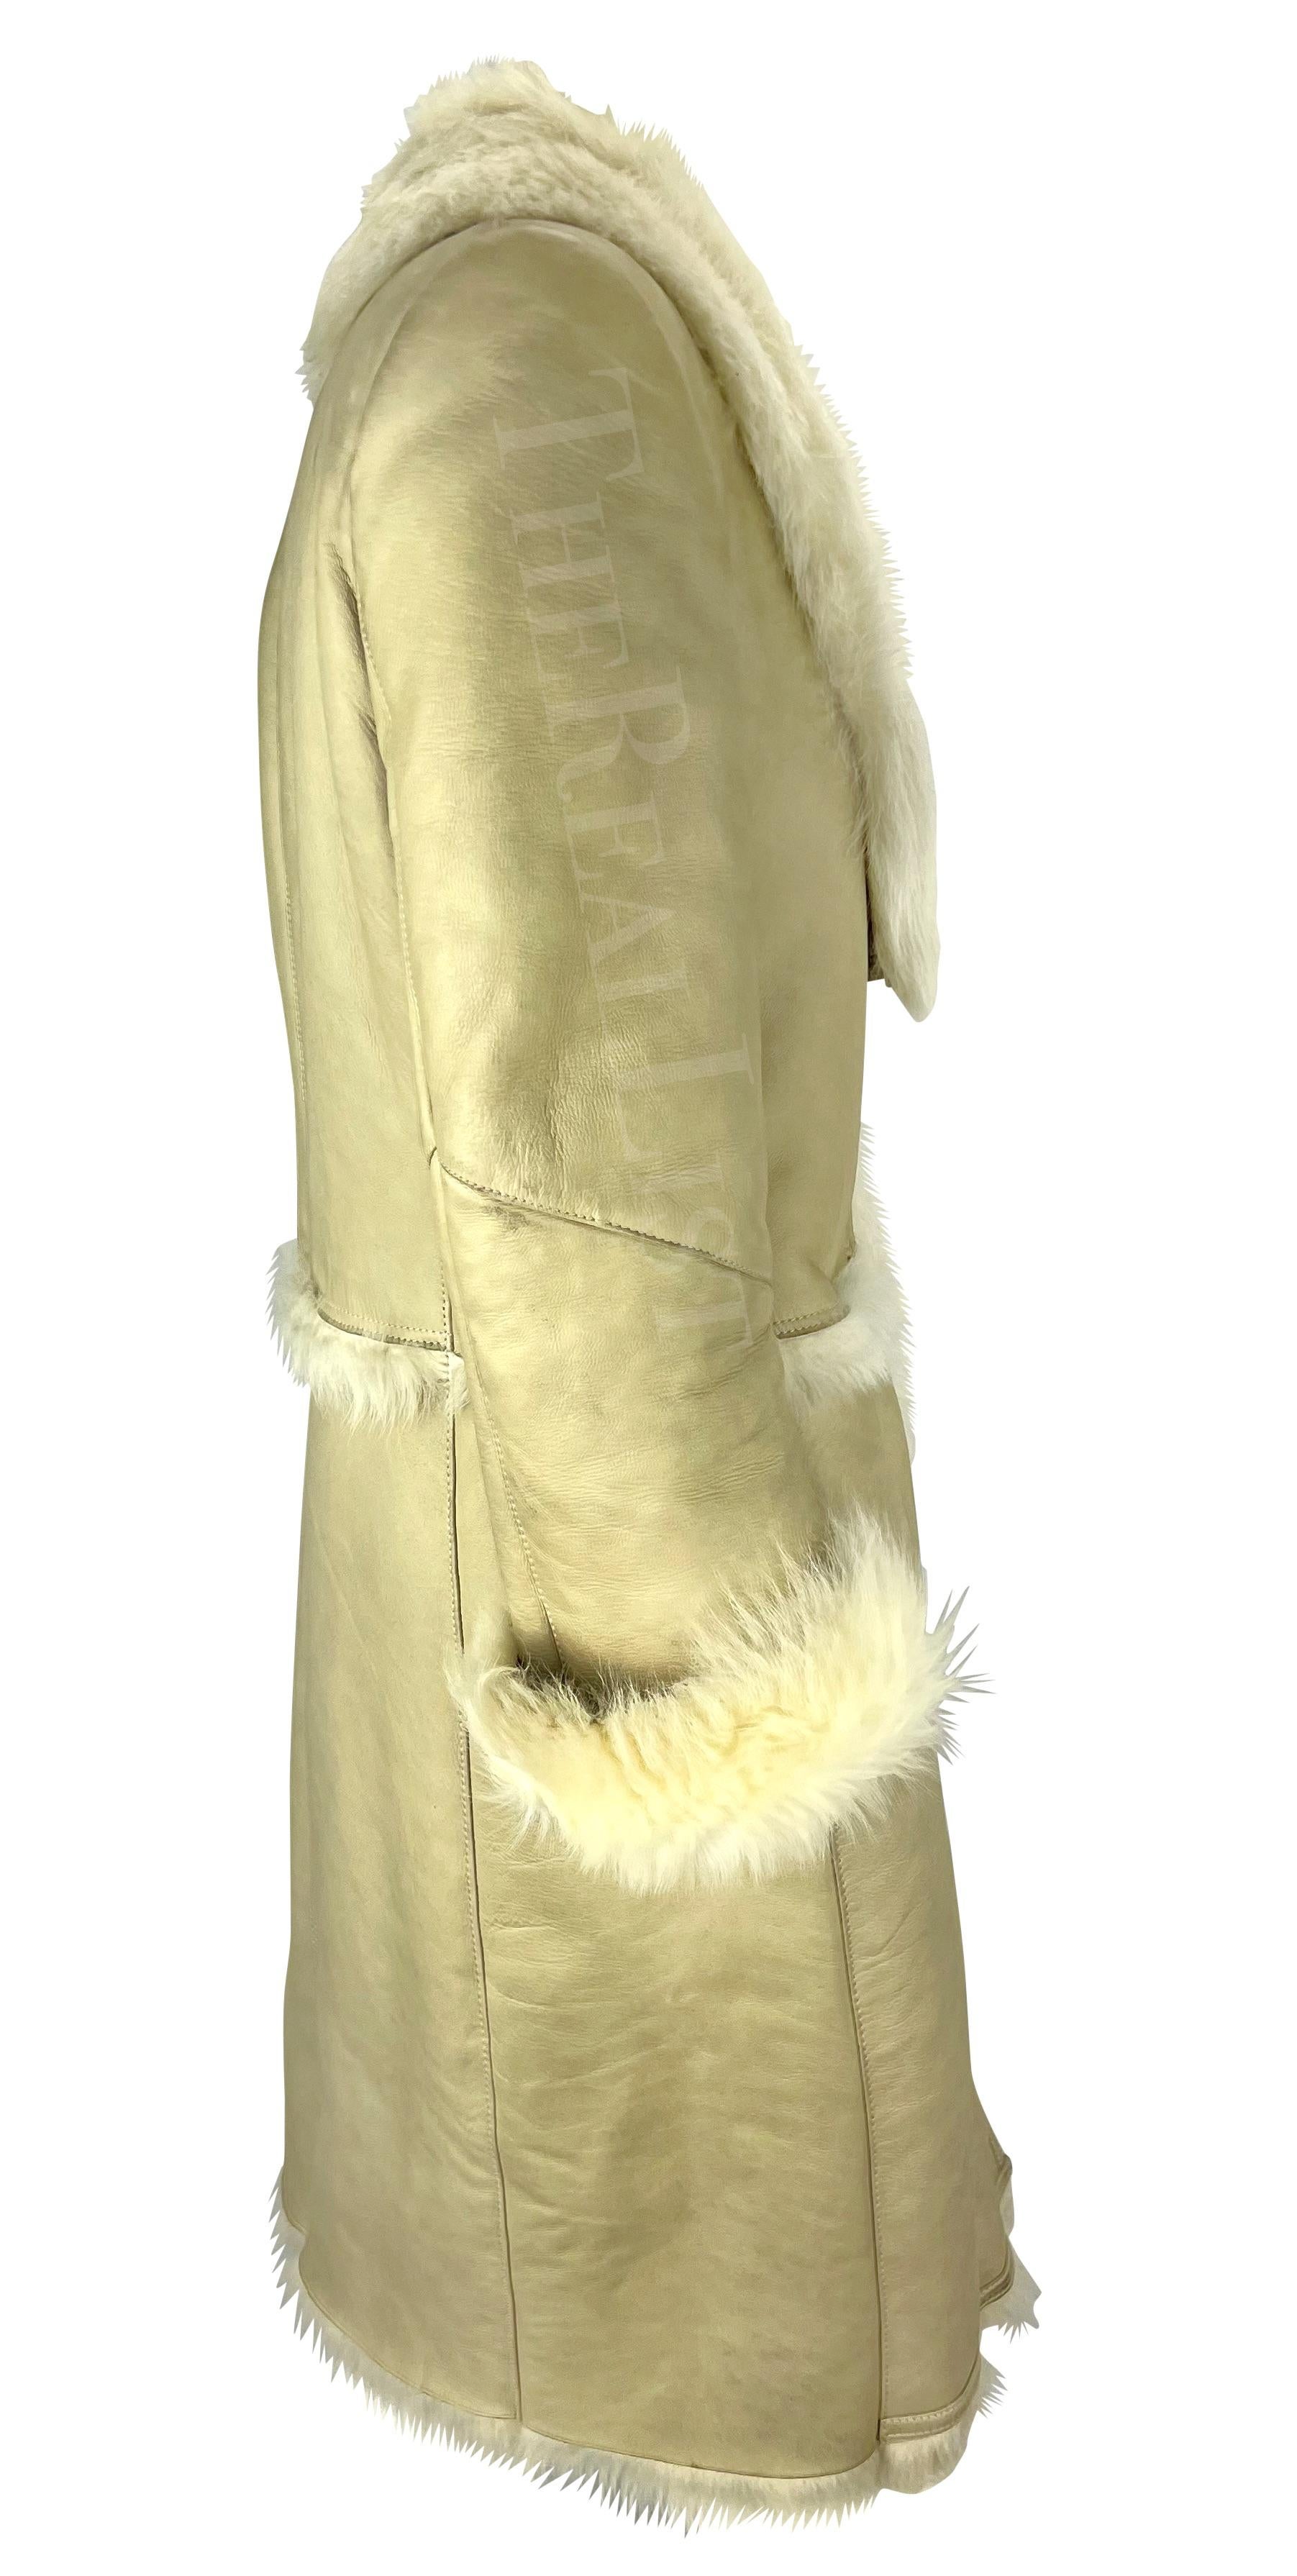 F/W 1997 Gucci by Tom Ford Beige Leather Shearling Fur Full-Length Coat For Sale 2